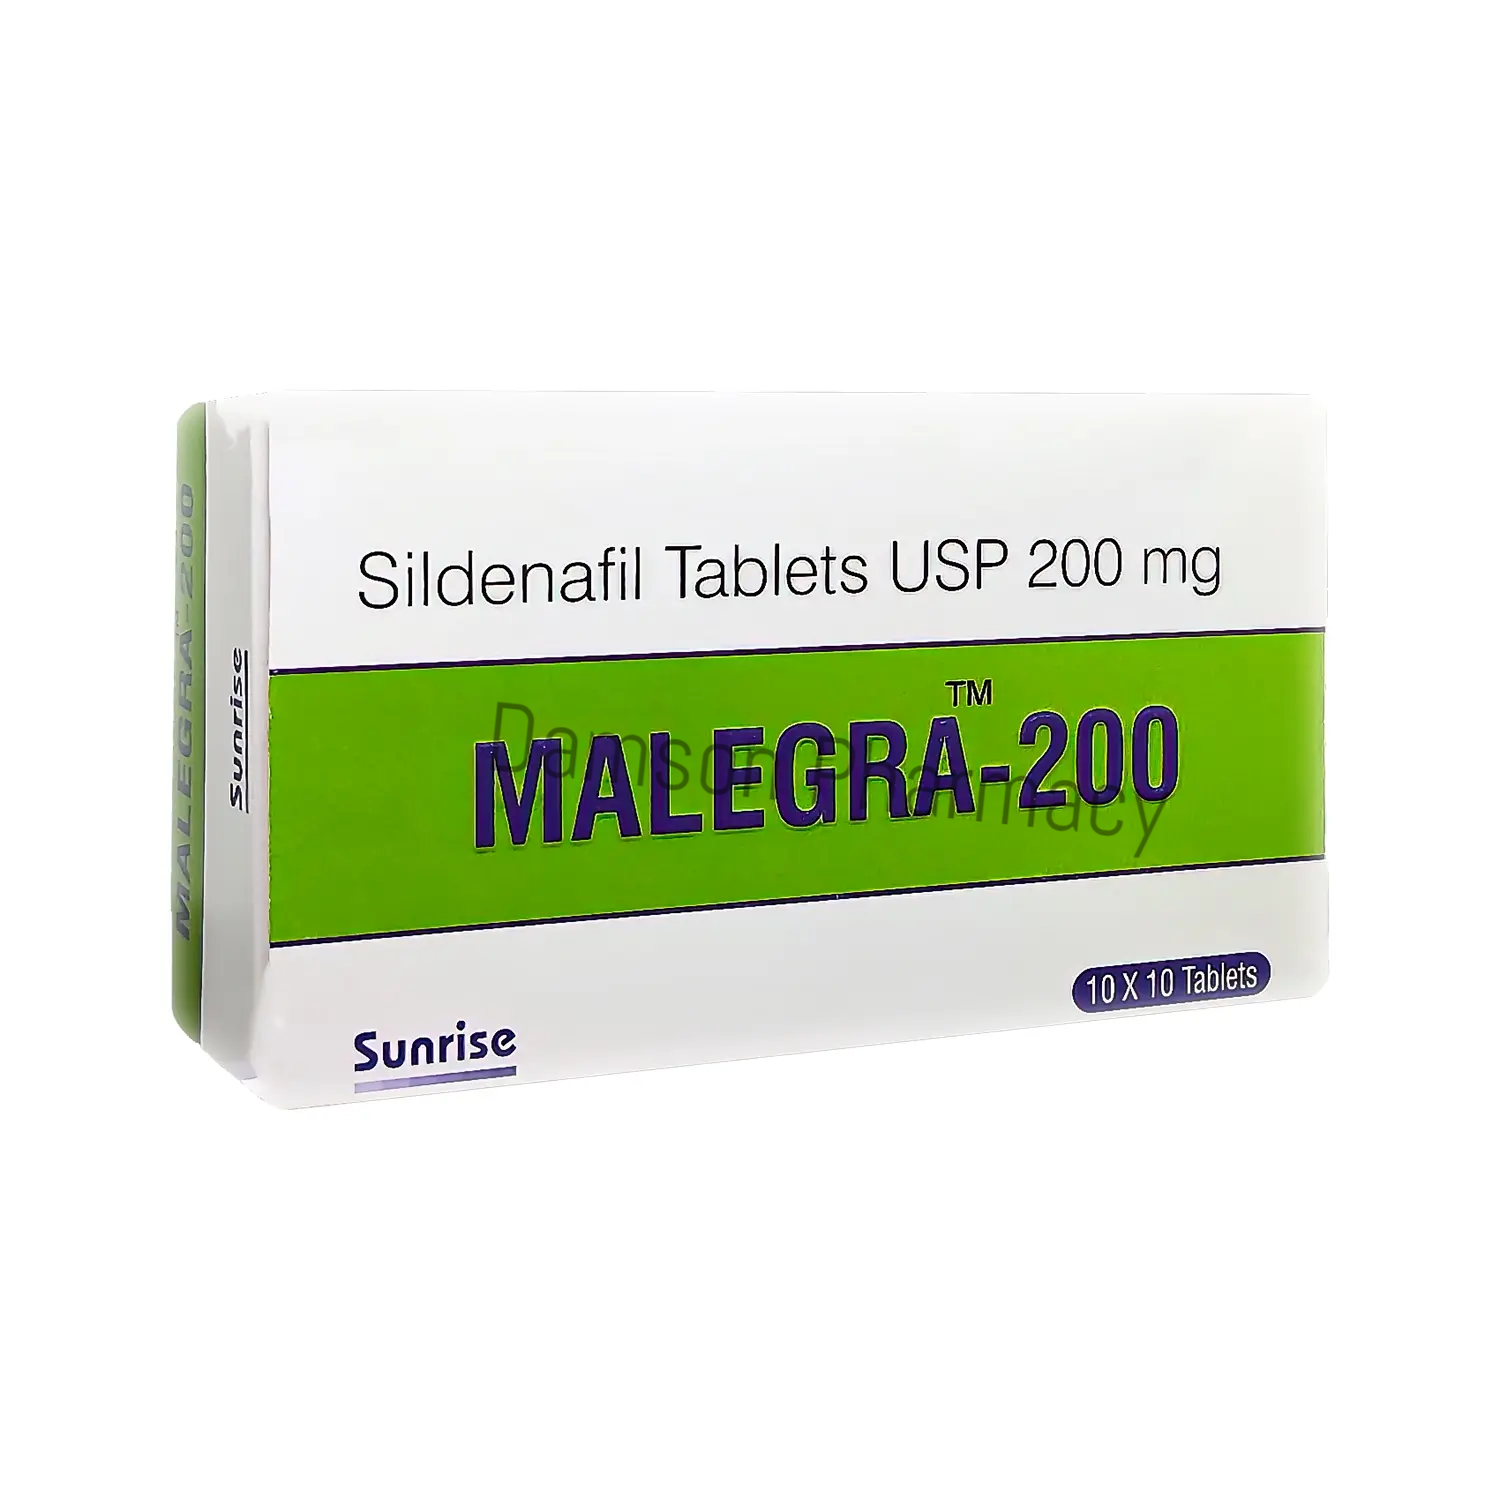 Malegra 200mg Sildenafil Tablet: Dosages | Price | Overview